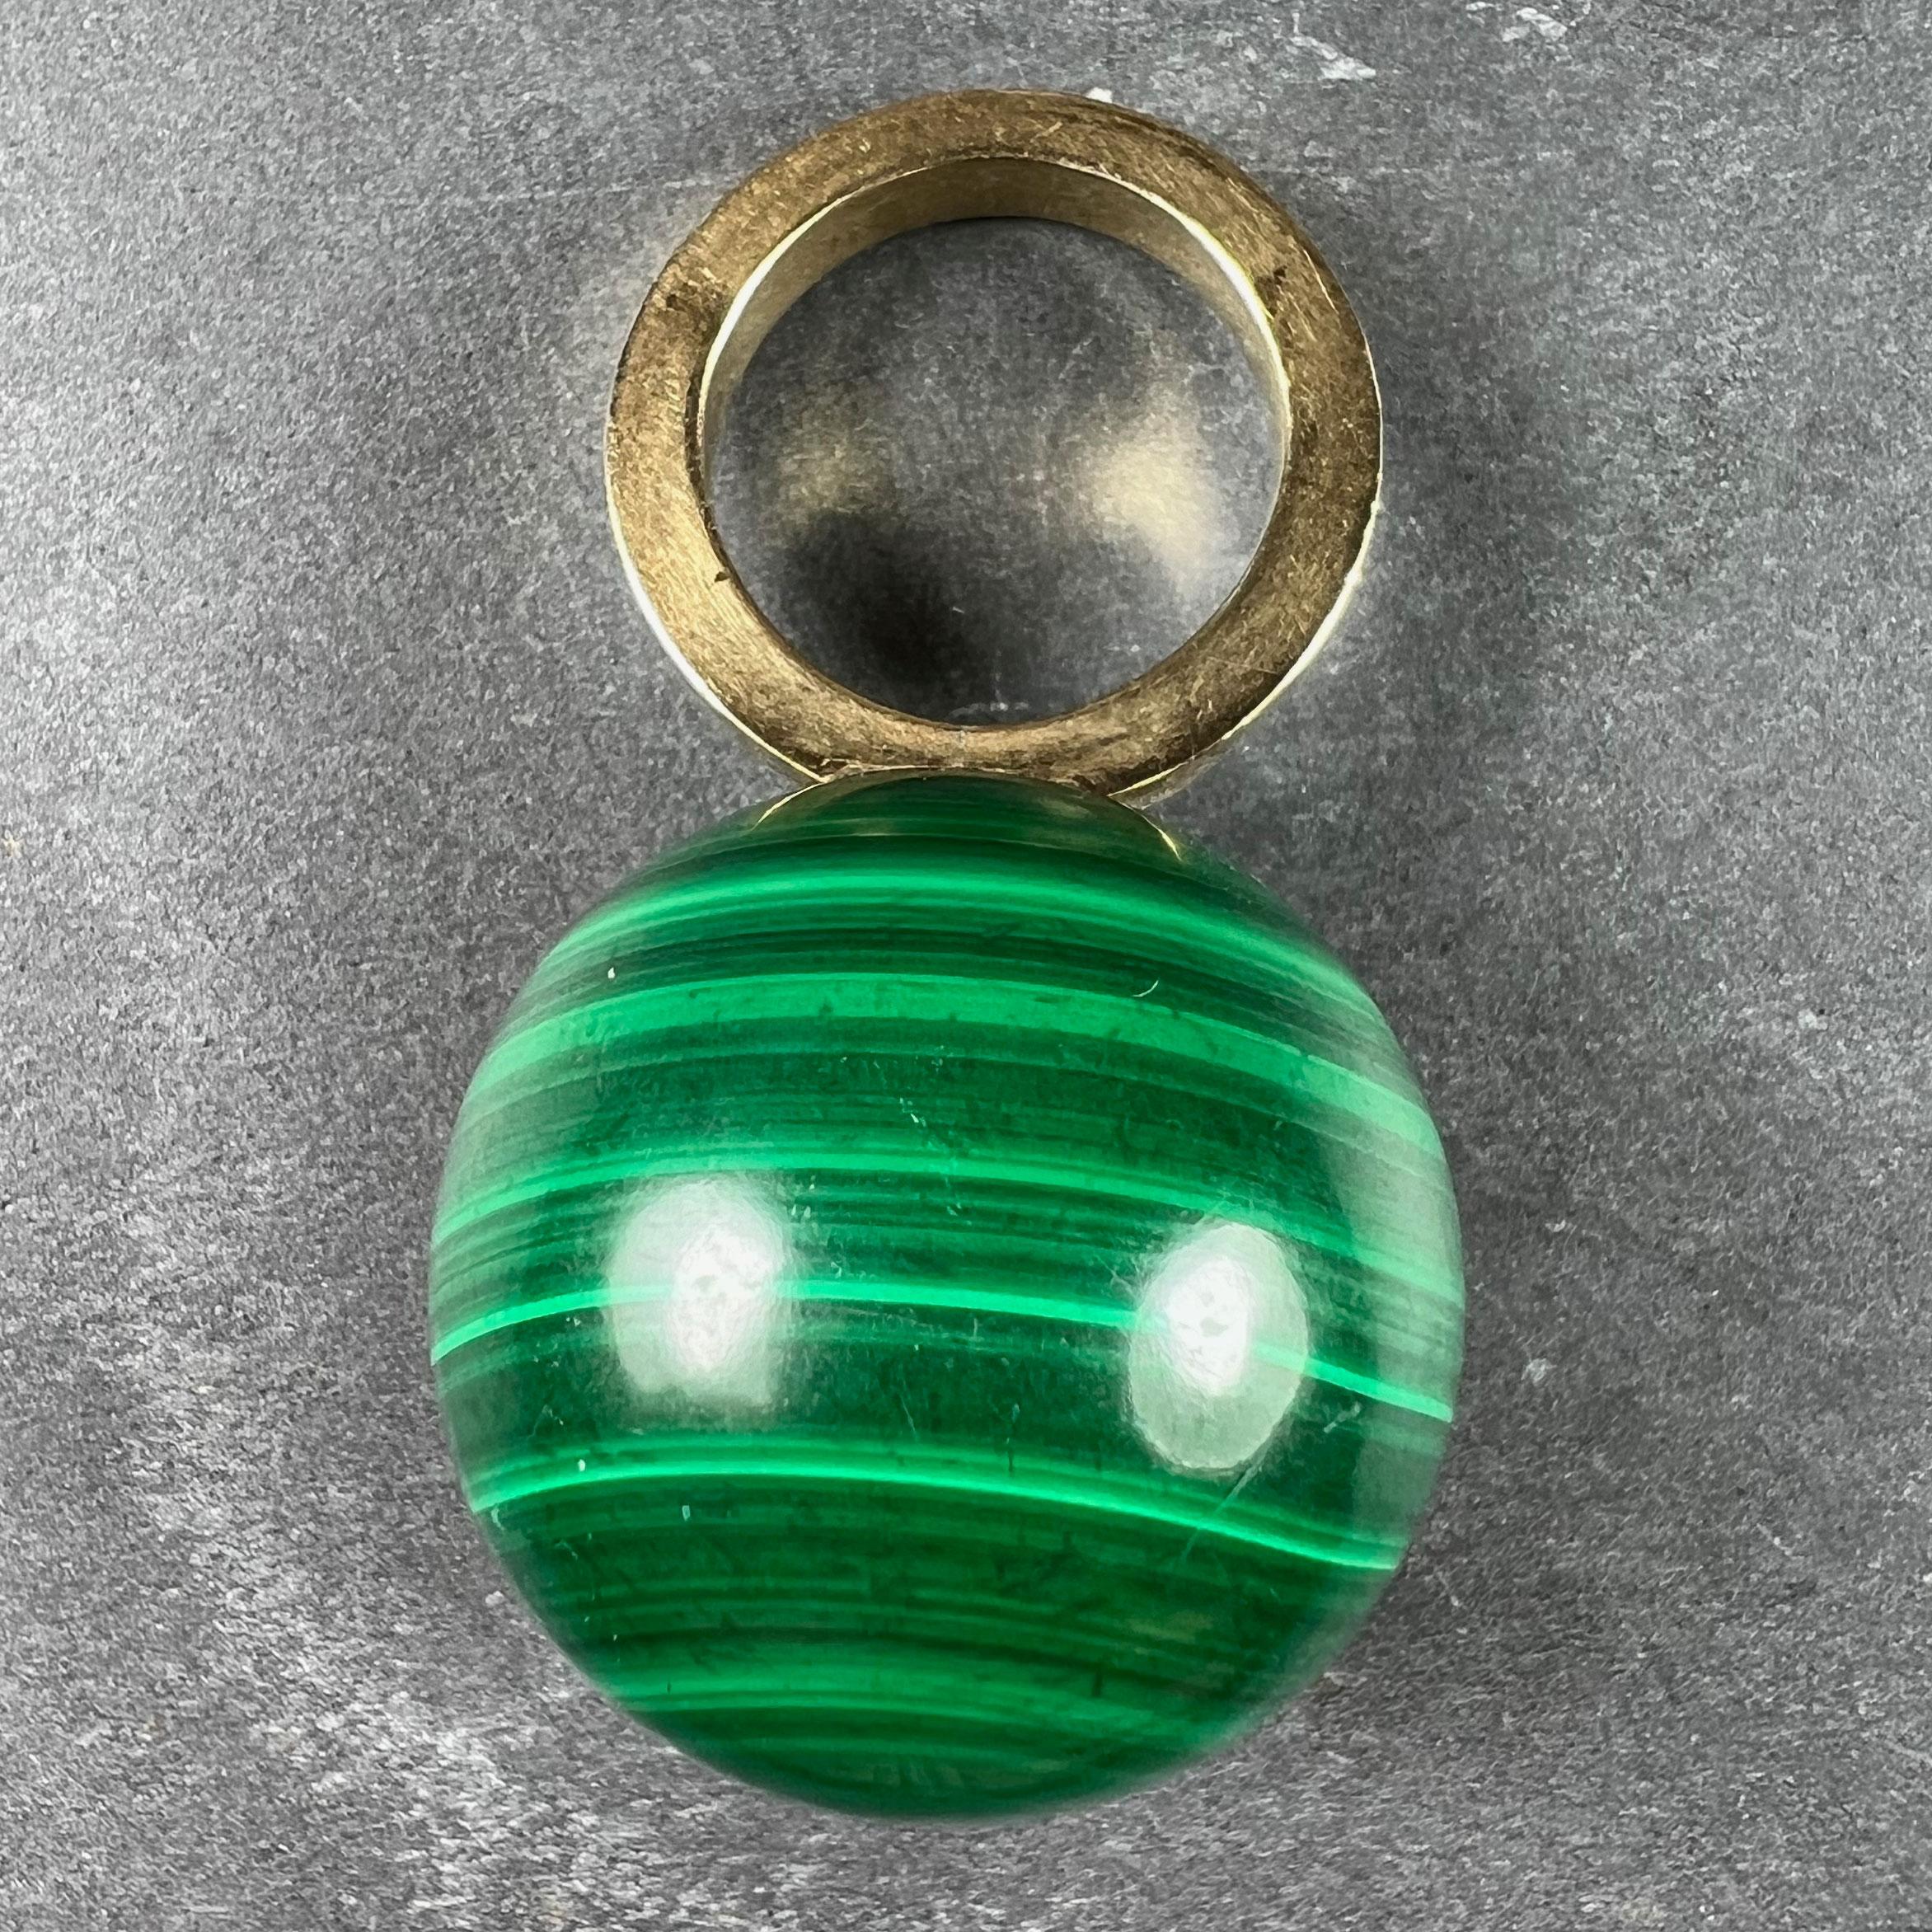 An 18 karat (18K) yellow gold ring in the funky style of the 1970s set with a large malachite sphere or ball. This unusual jewel may be worn as a pendant or a ring according to the wearer's preference. The ring is stamped with the owl mark for